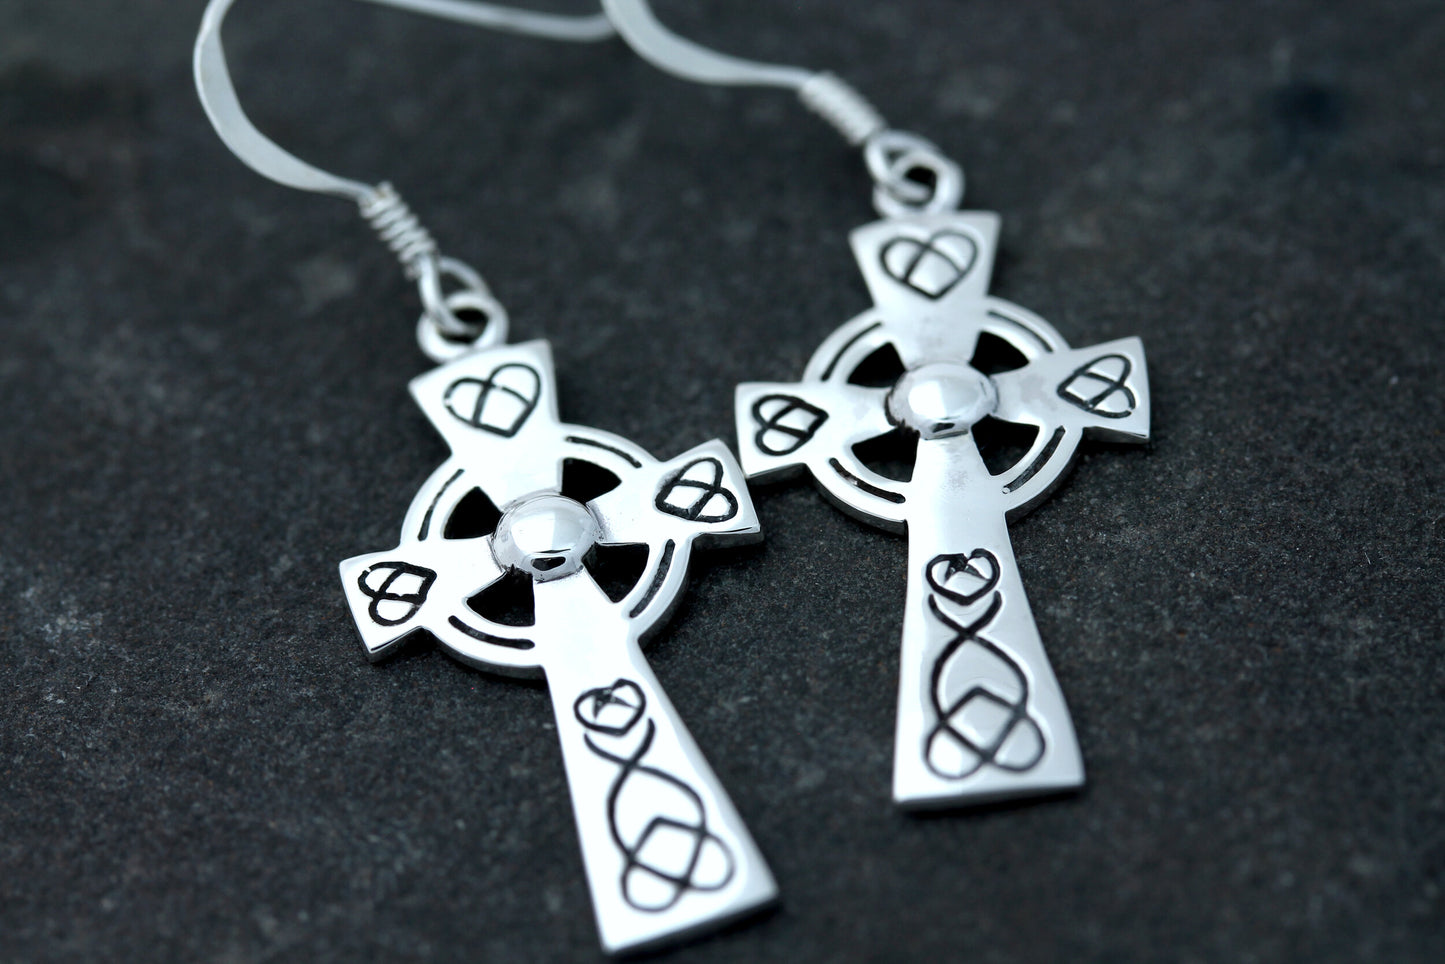 Celtic Cross Earrings - Etched Looped Hearts